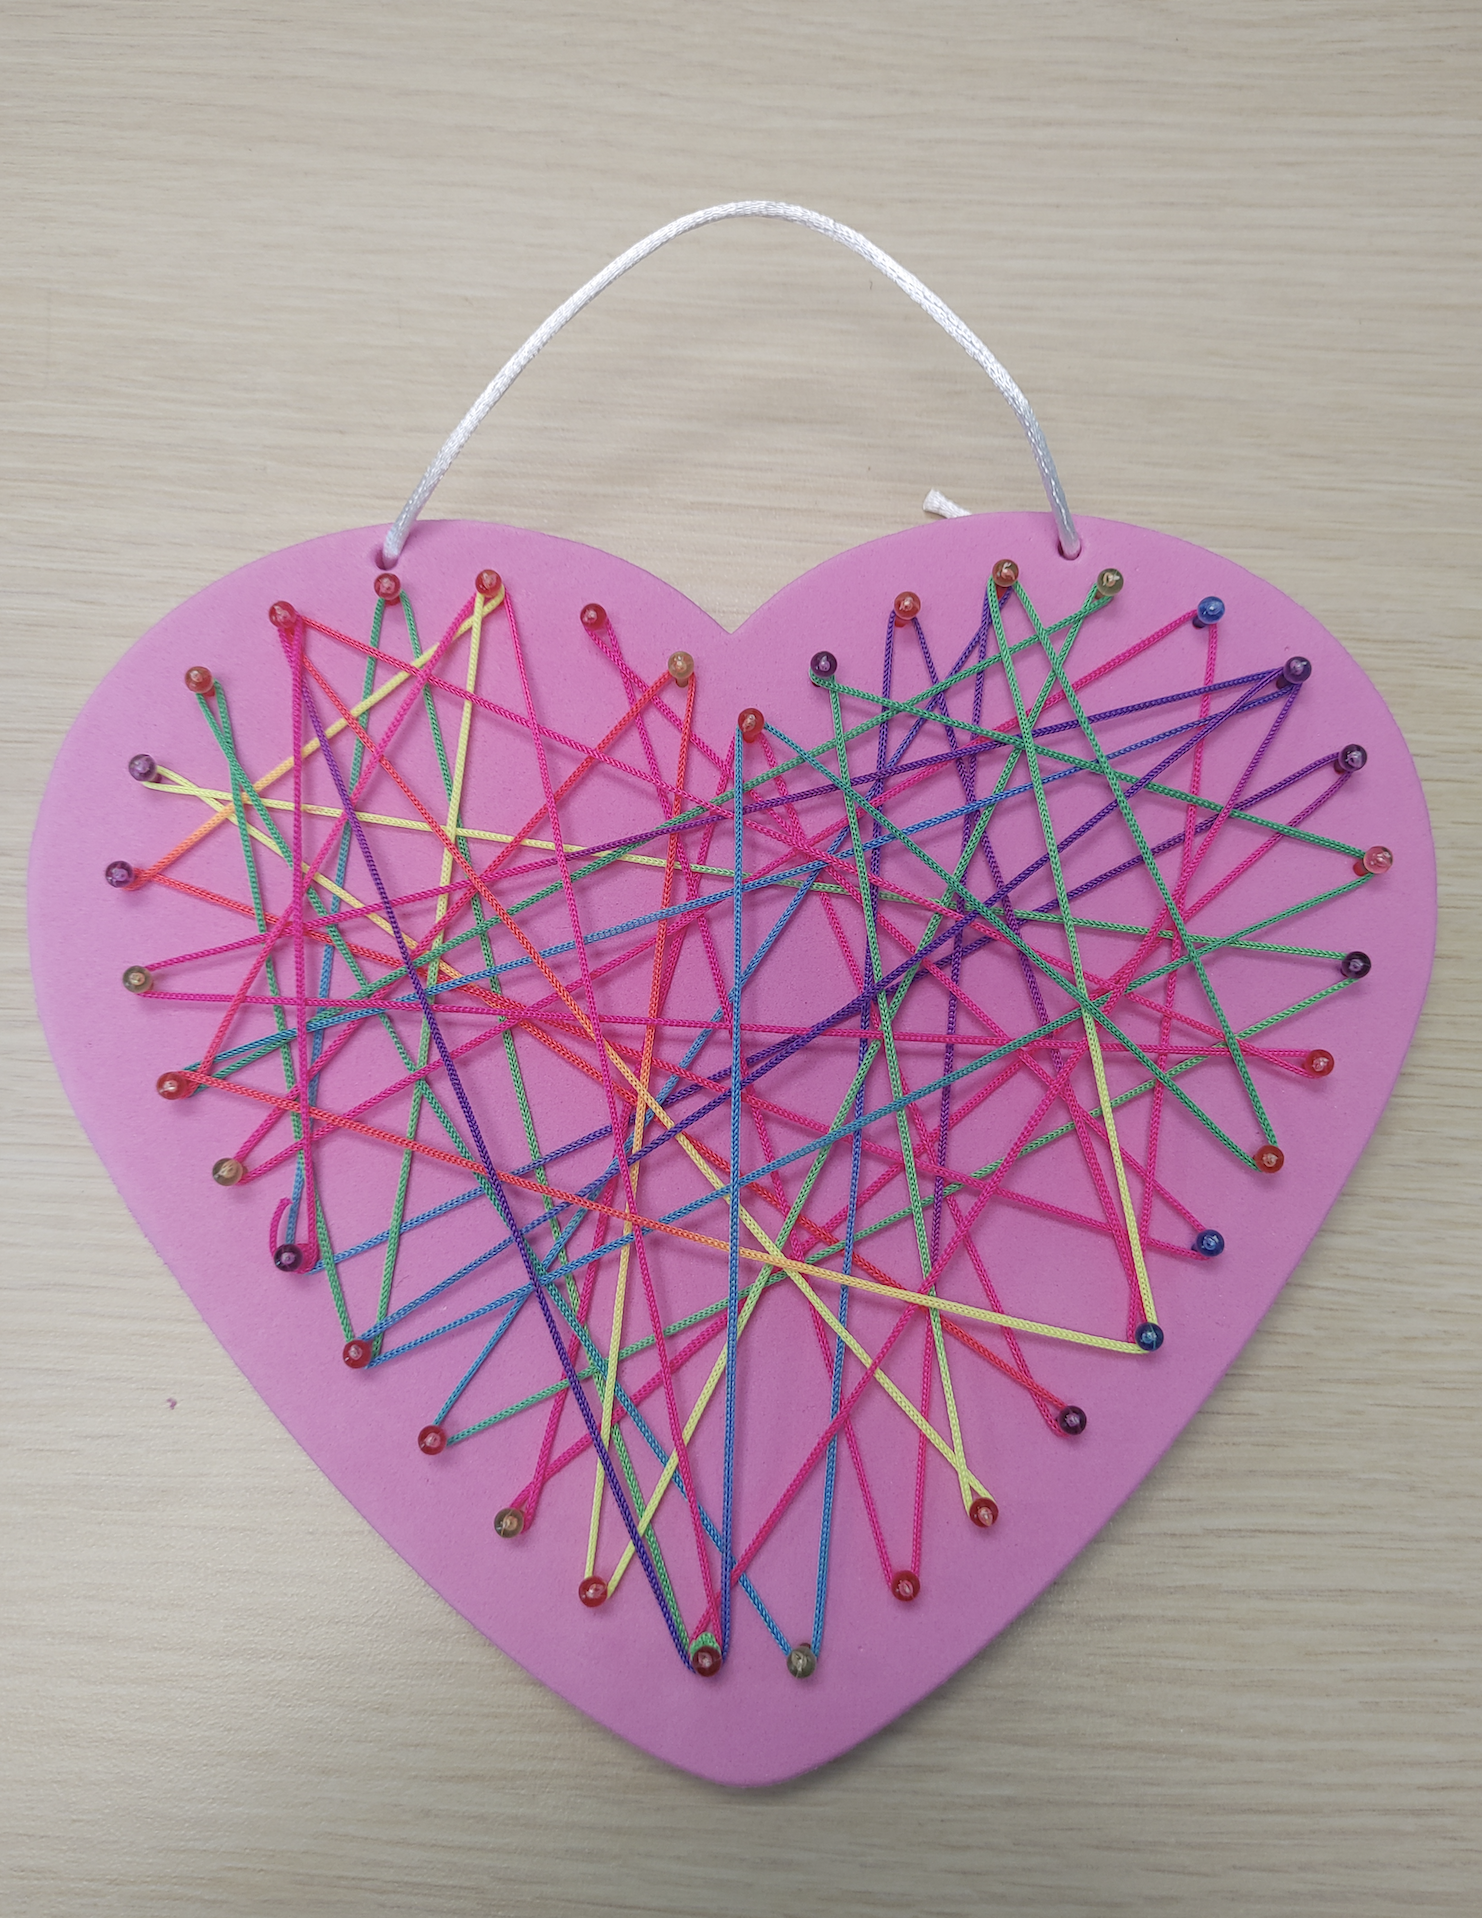 Pink heart with string